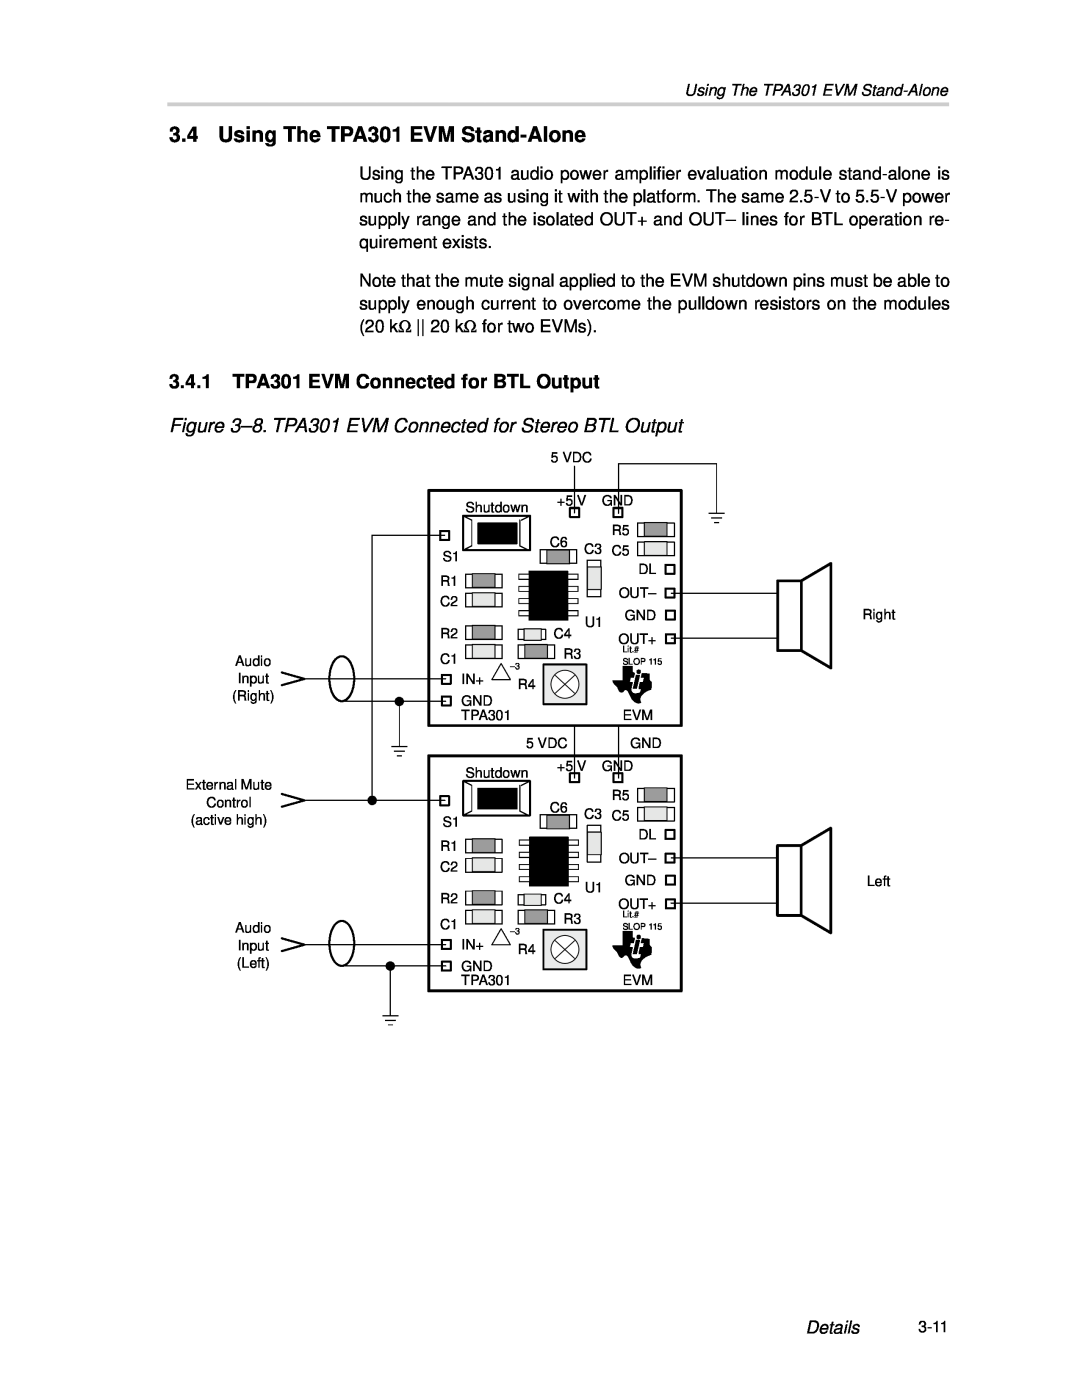 Texas Instruments manual Using The TPA301 EVM Stand-Alone, 3.4.1TPA301 EVM Connected for BTL Output, Details 